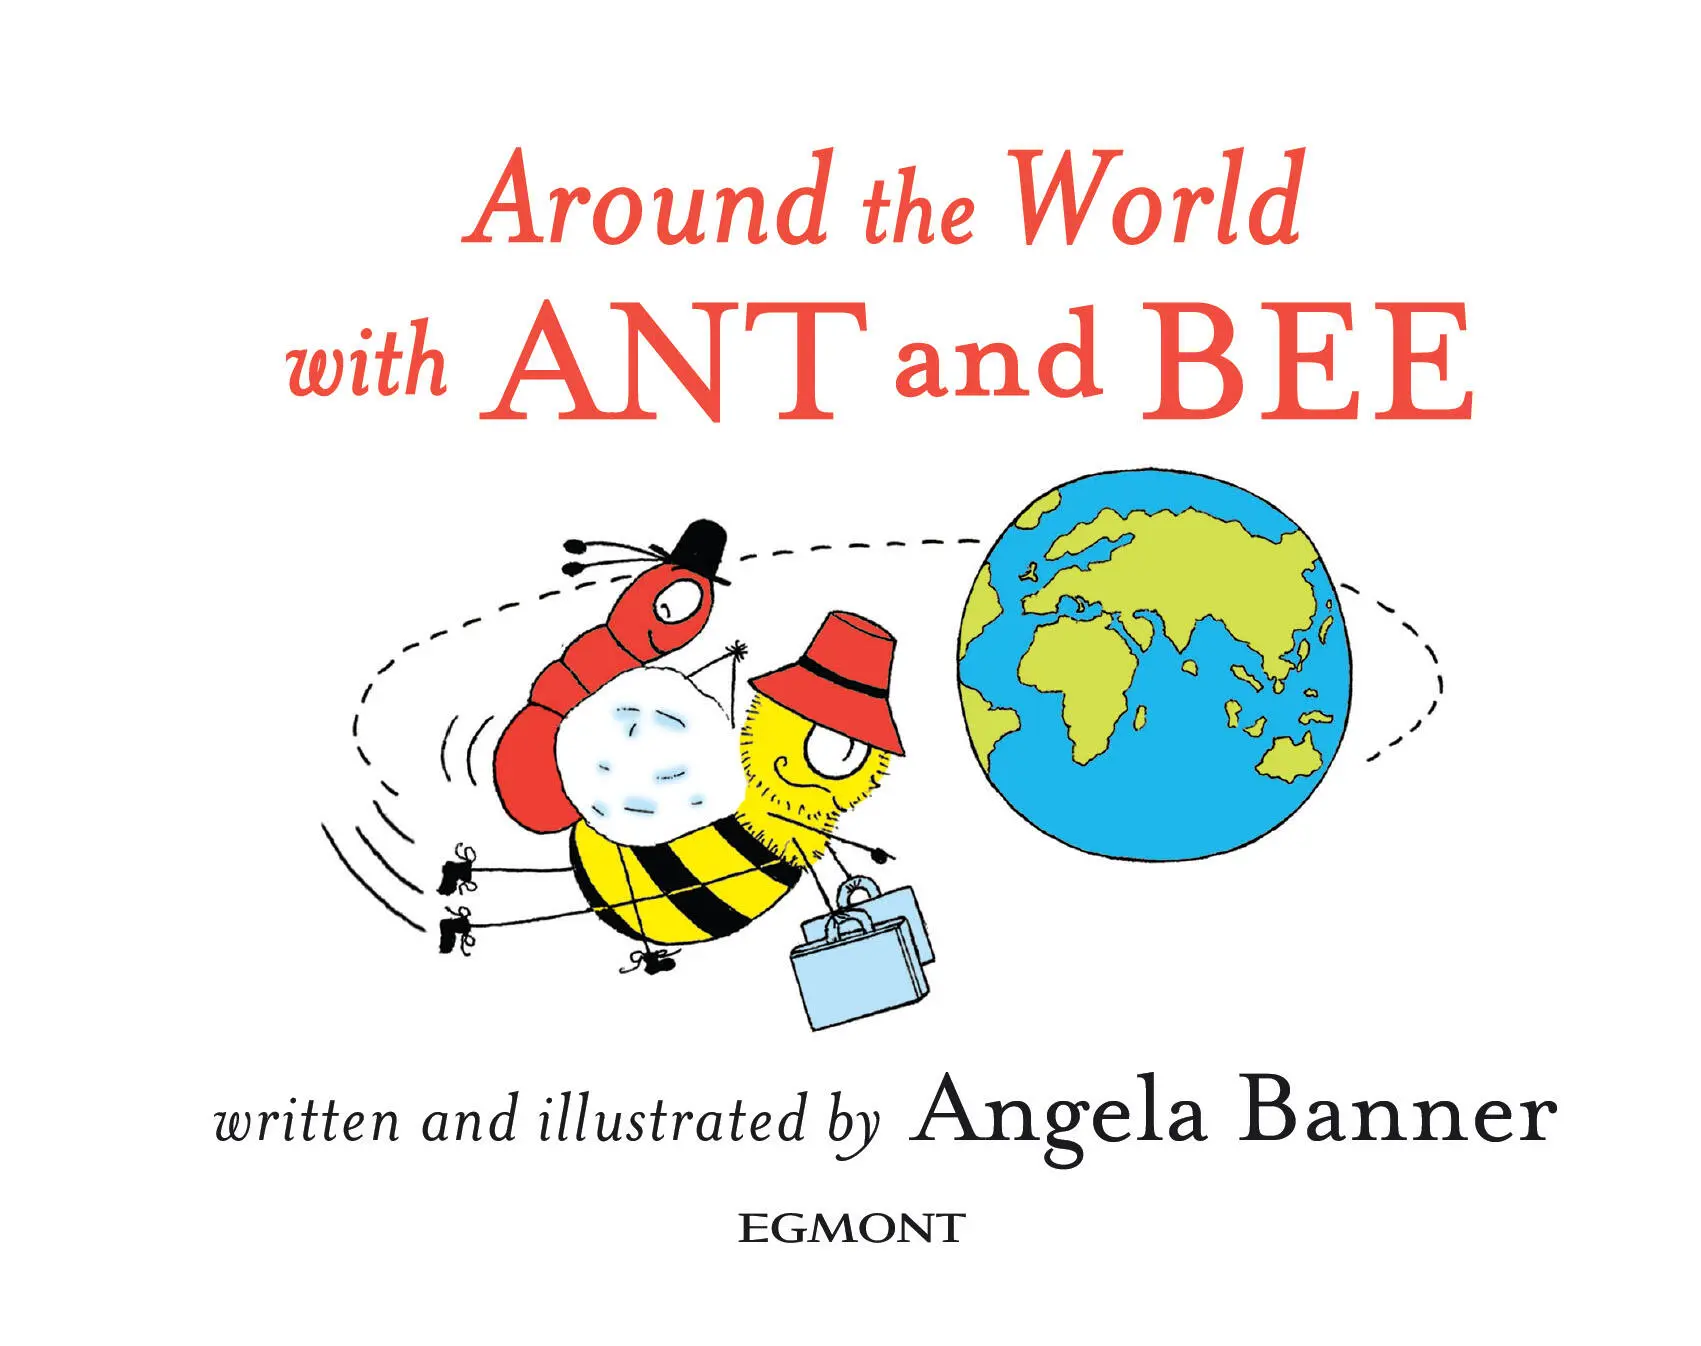 This ANT and BEE book belongs to - фото 2